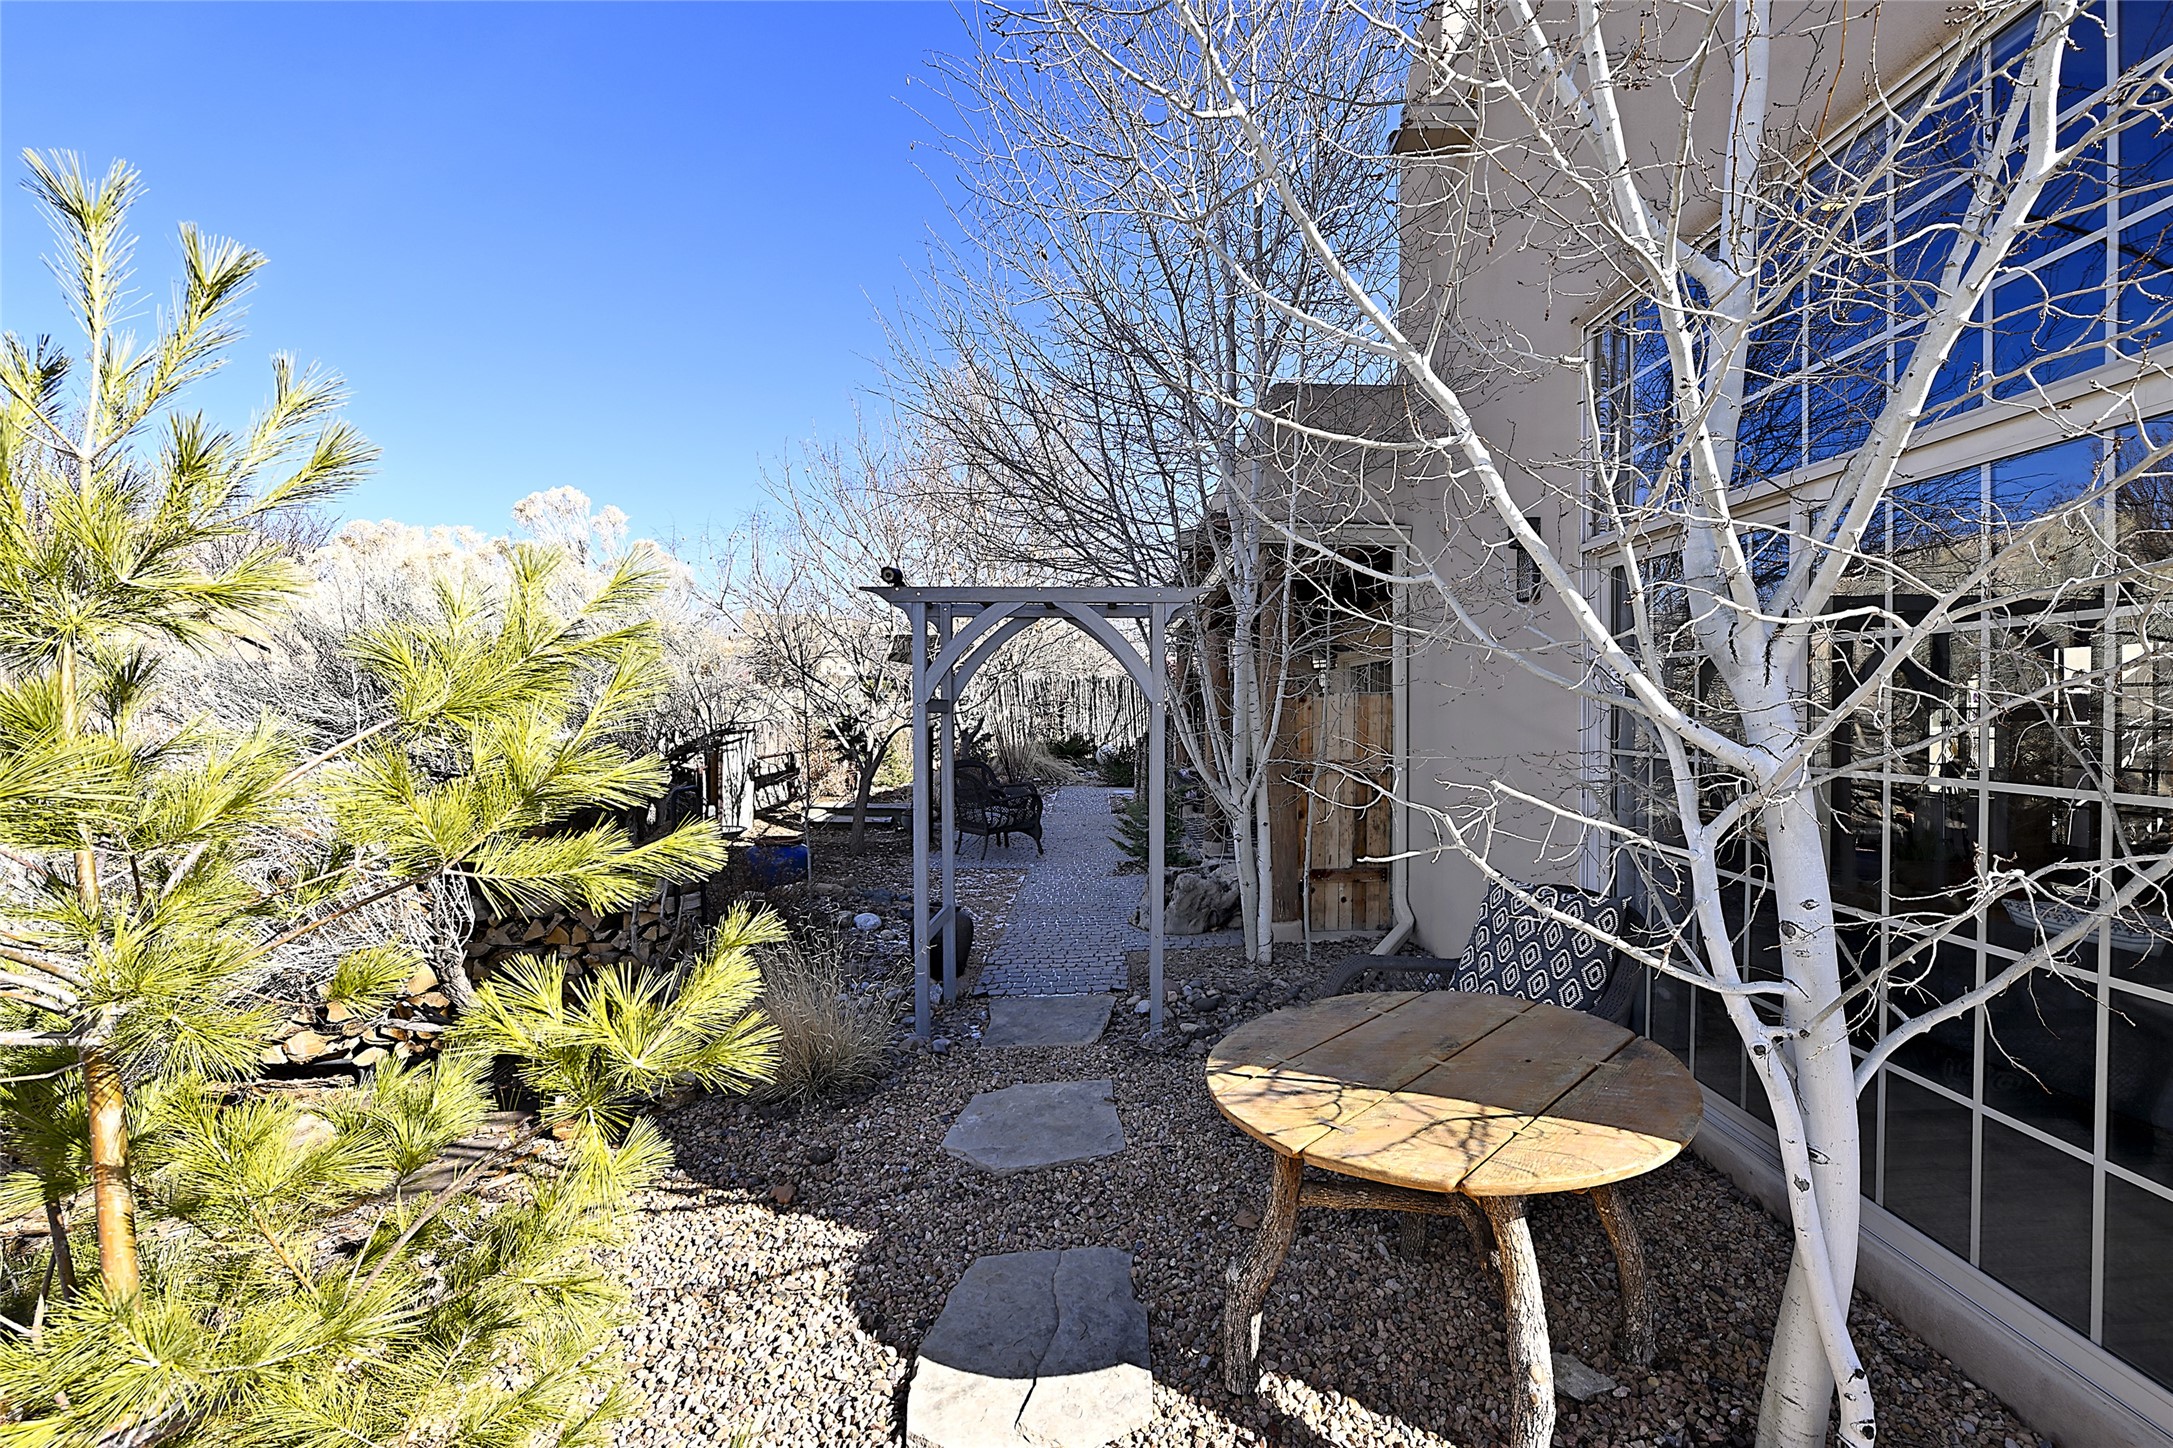 4245 Howling Wolf Lane, Santa Fe, New Mexico 87507, 3 Bedrooms Bedrooms, ,3 BathroomsBathrooms,Residential,For Sale,4245 Howling Wolf Lane,202401107